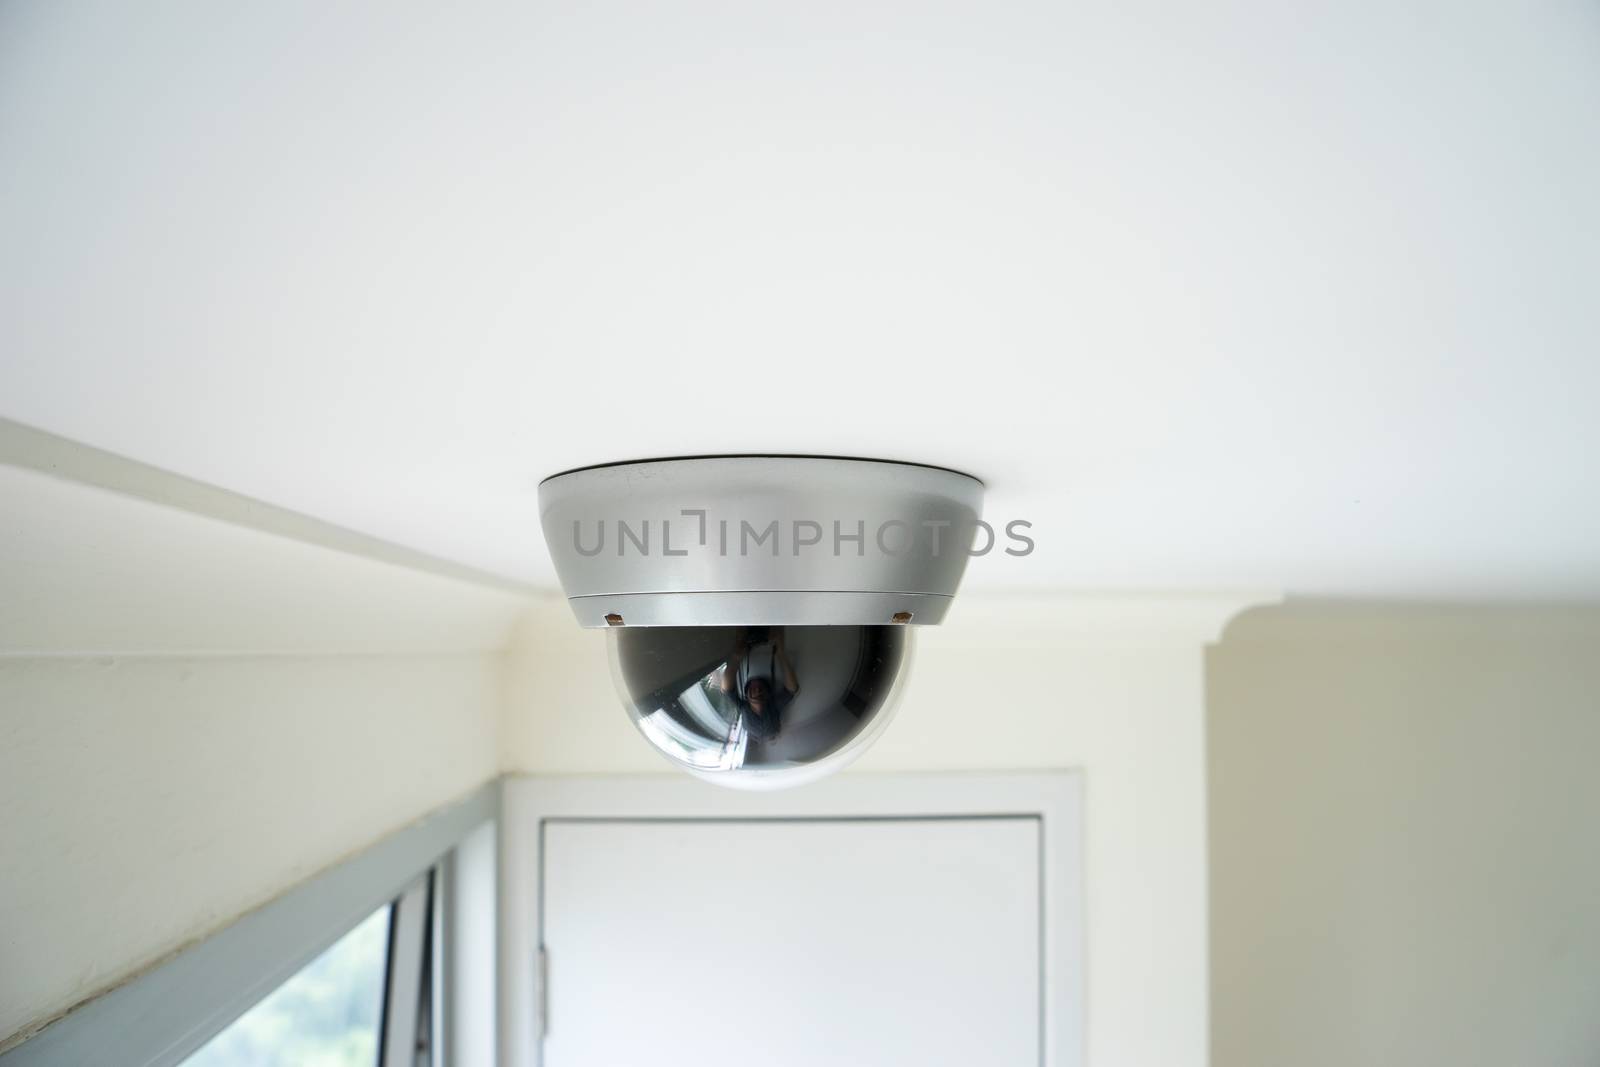 CCTV security camera monitor in office building by Alicephoto